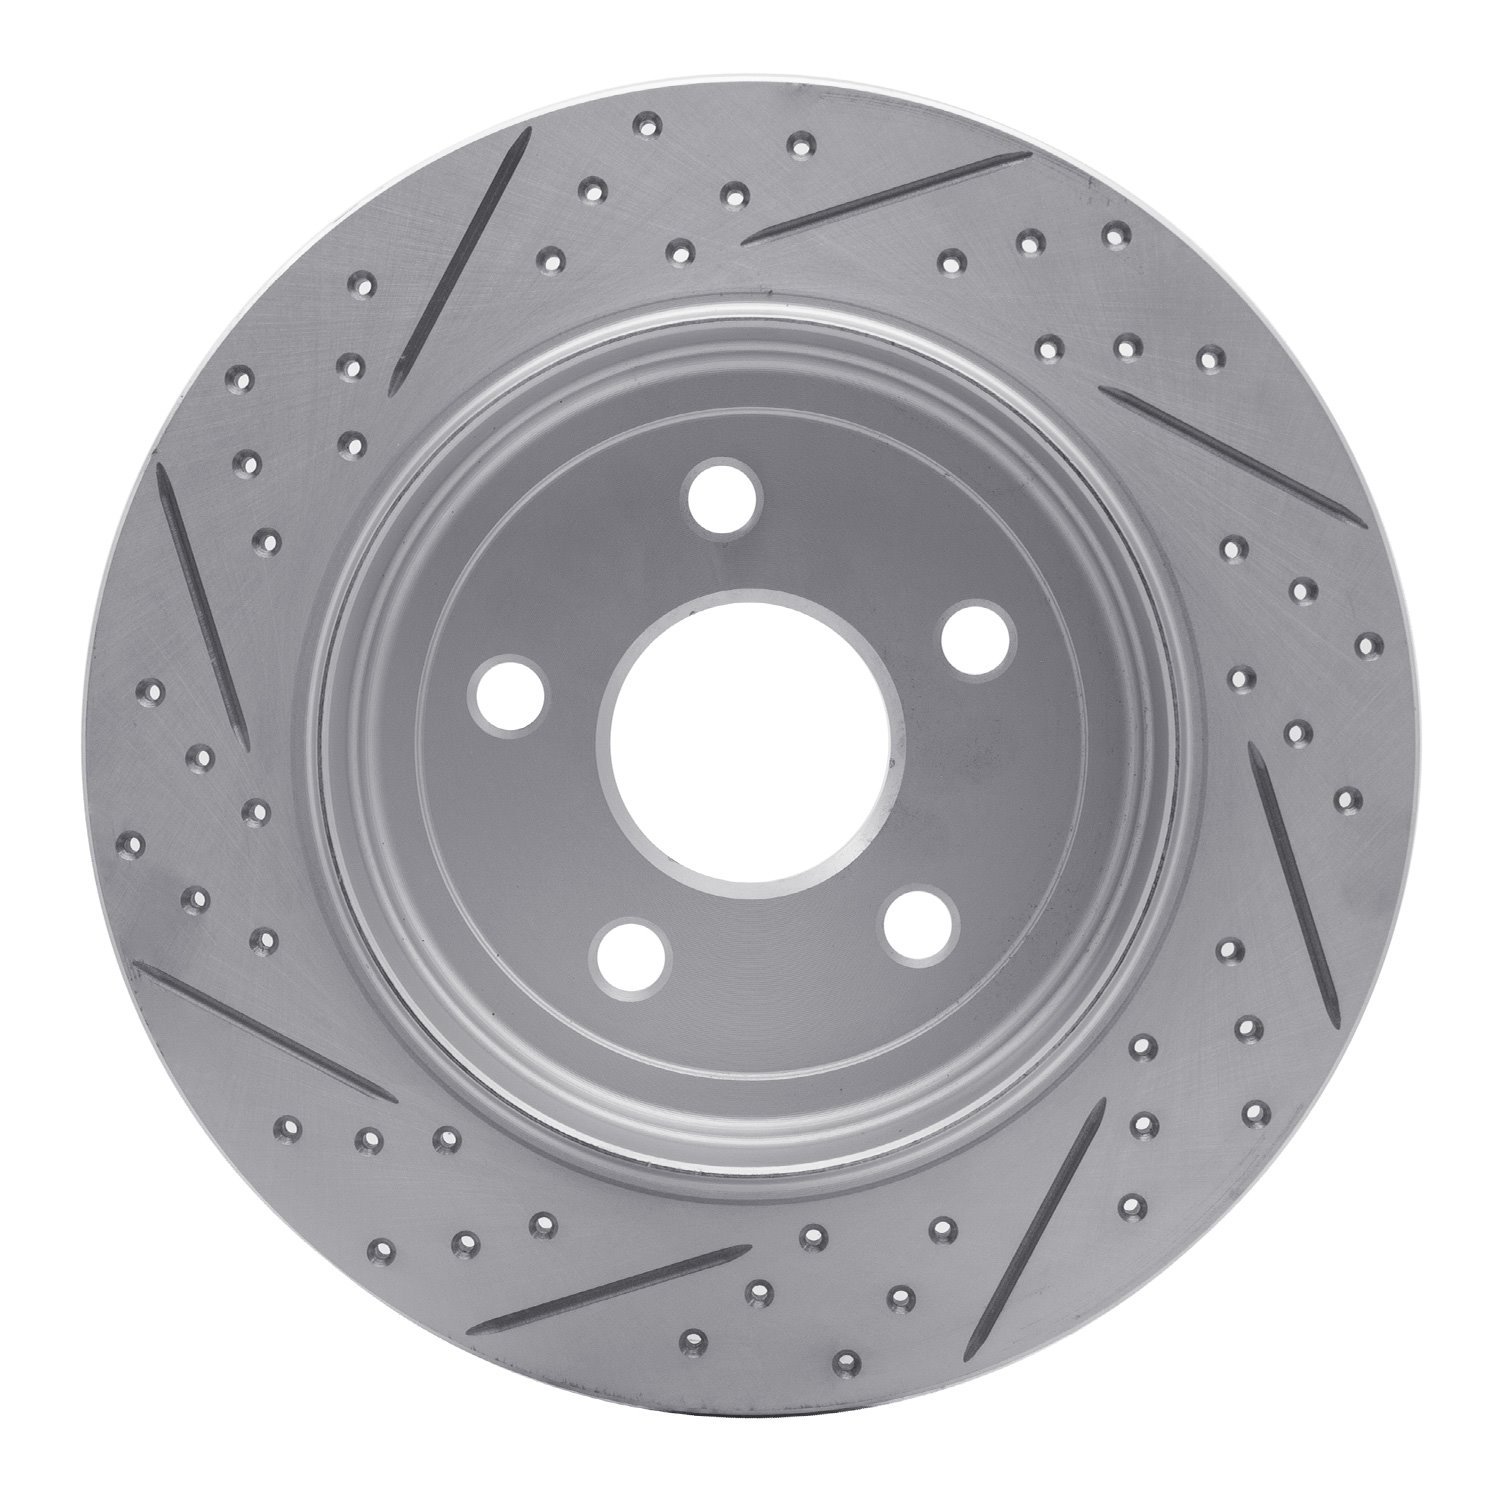 830-42004R Geoperformance Drilled/Slotted Brake Rotor, Fits Select Mopar, Position: Rear Right